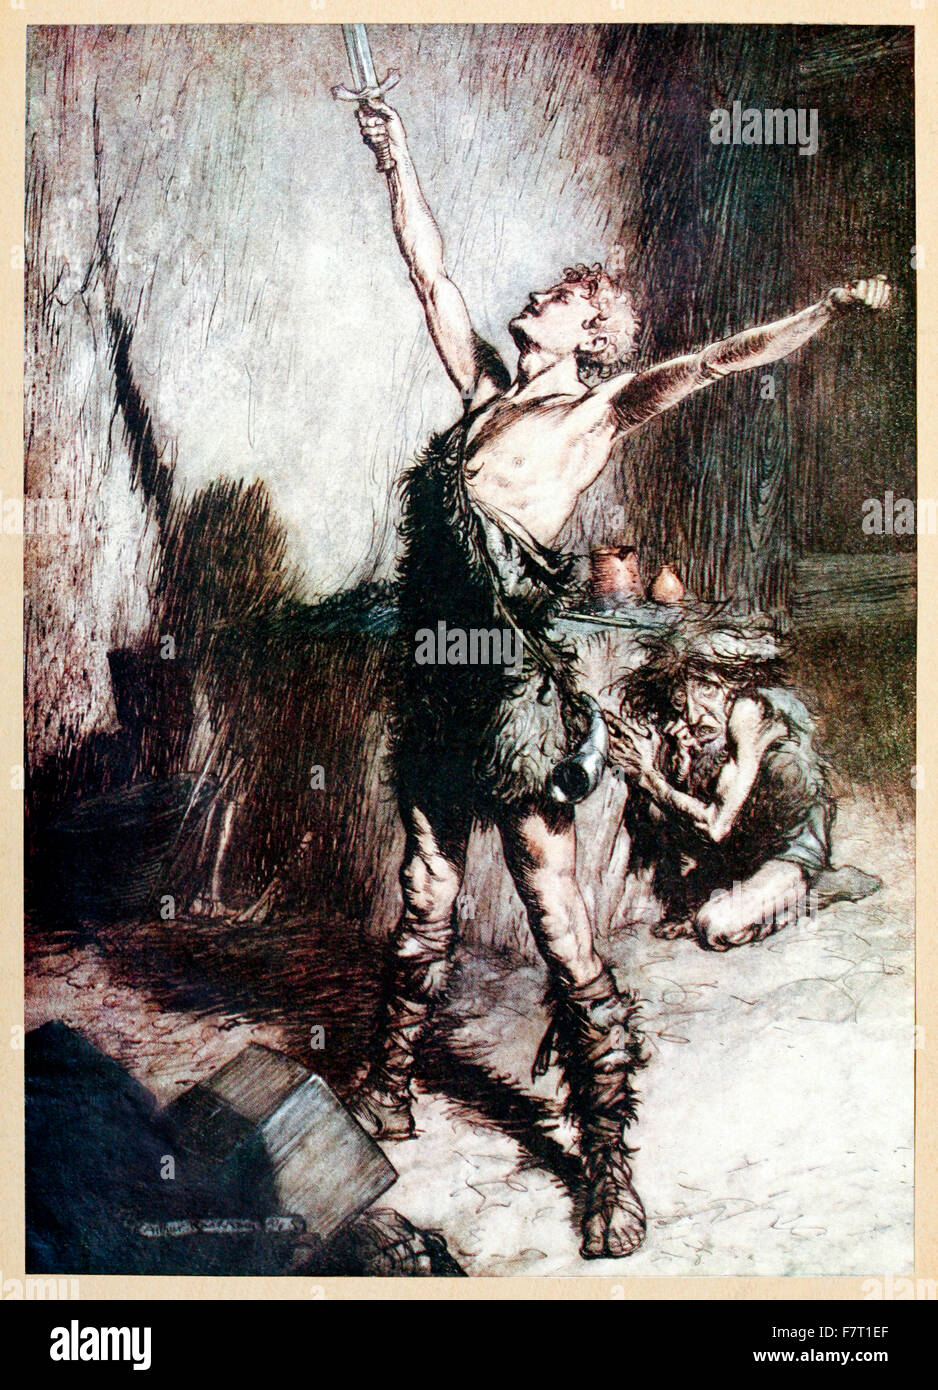 ''Nothung! Nothung! Conquering sword!'' from 'Siegfried & The Twilight of the Gods' illustrated by Arthur Rackham (1867-1939). See description for more information. Stock Photo